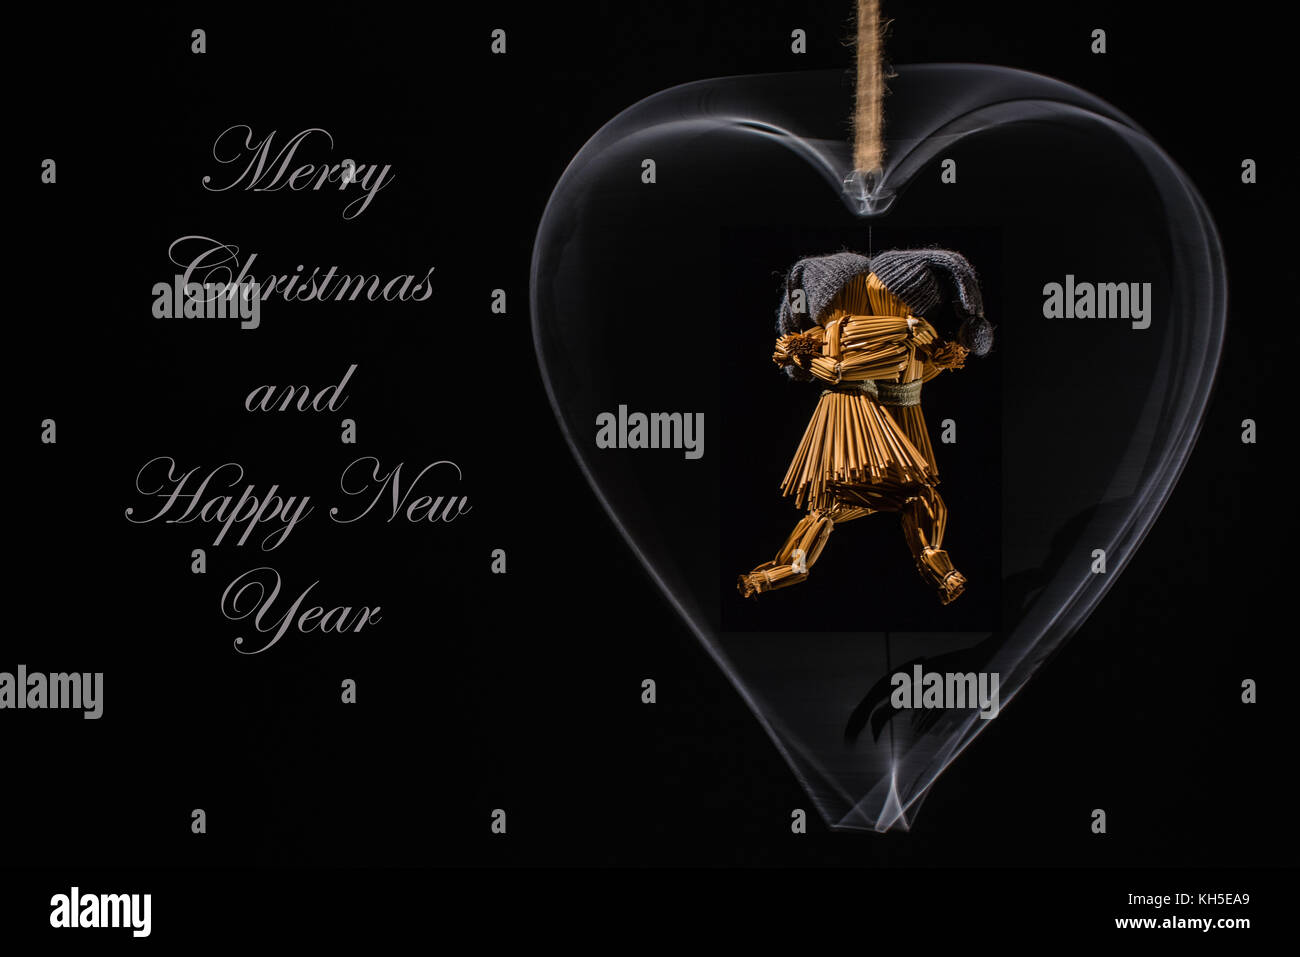 Christmas greetings with dancing straw dolls in a rotating metal heart and with the text: Merry Christmas and Happy New Year Stock Photo